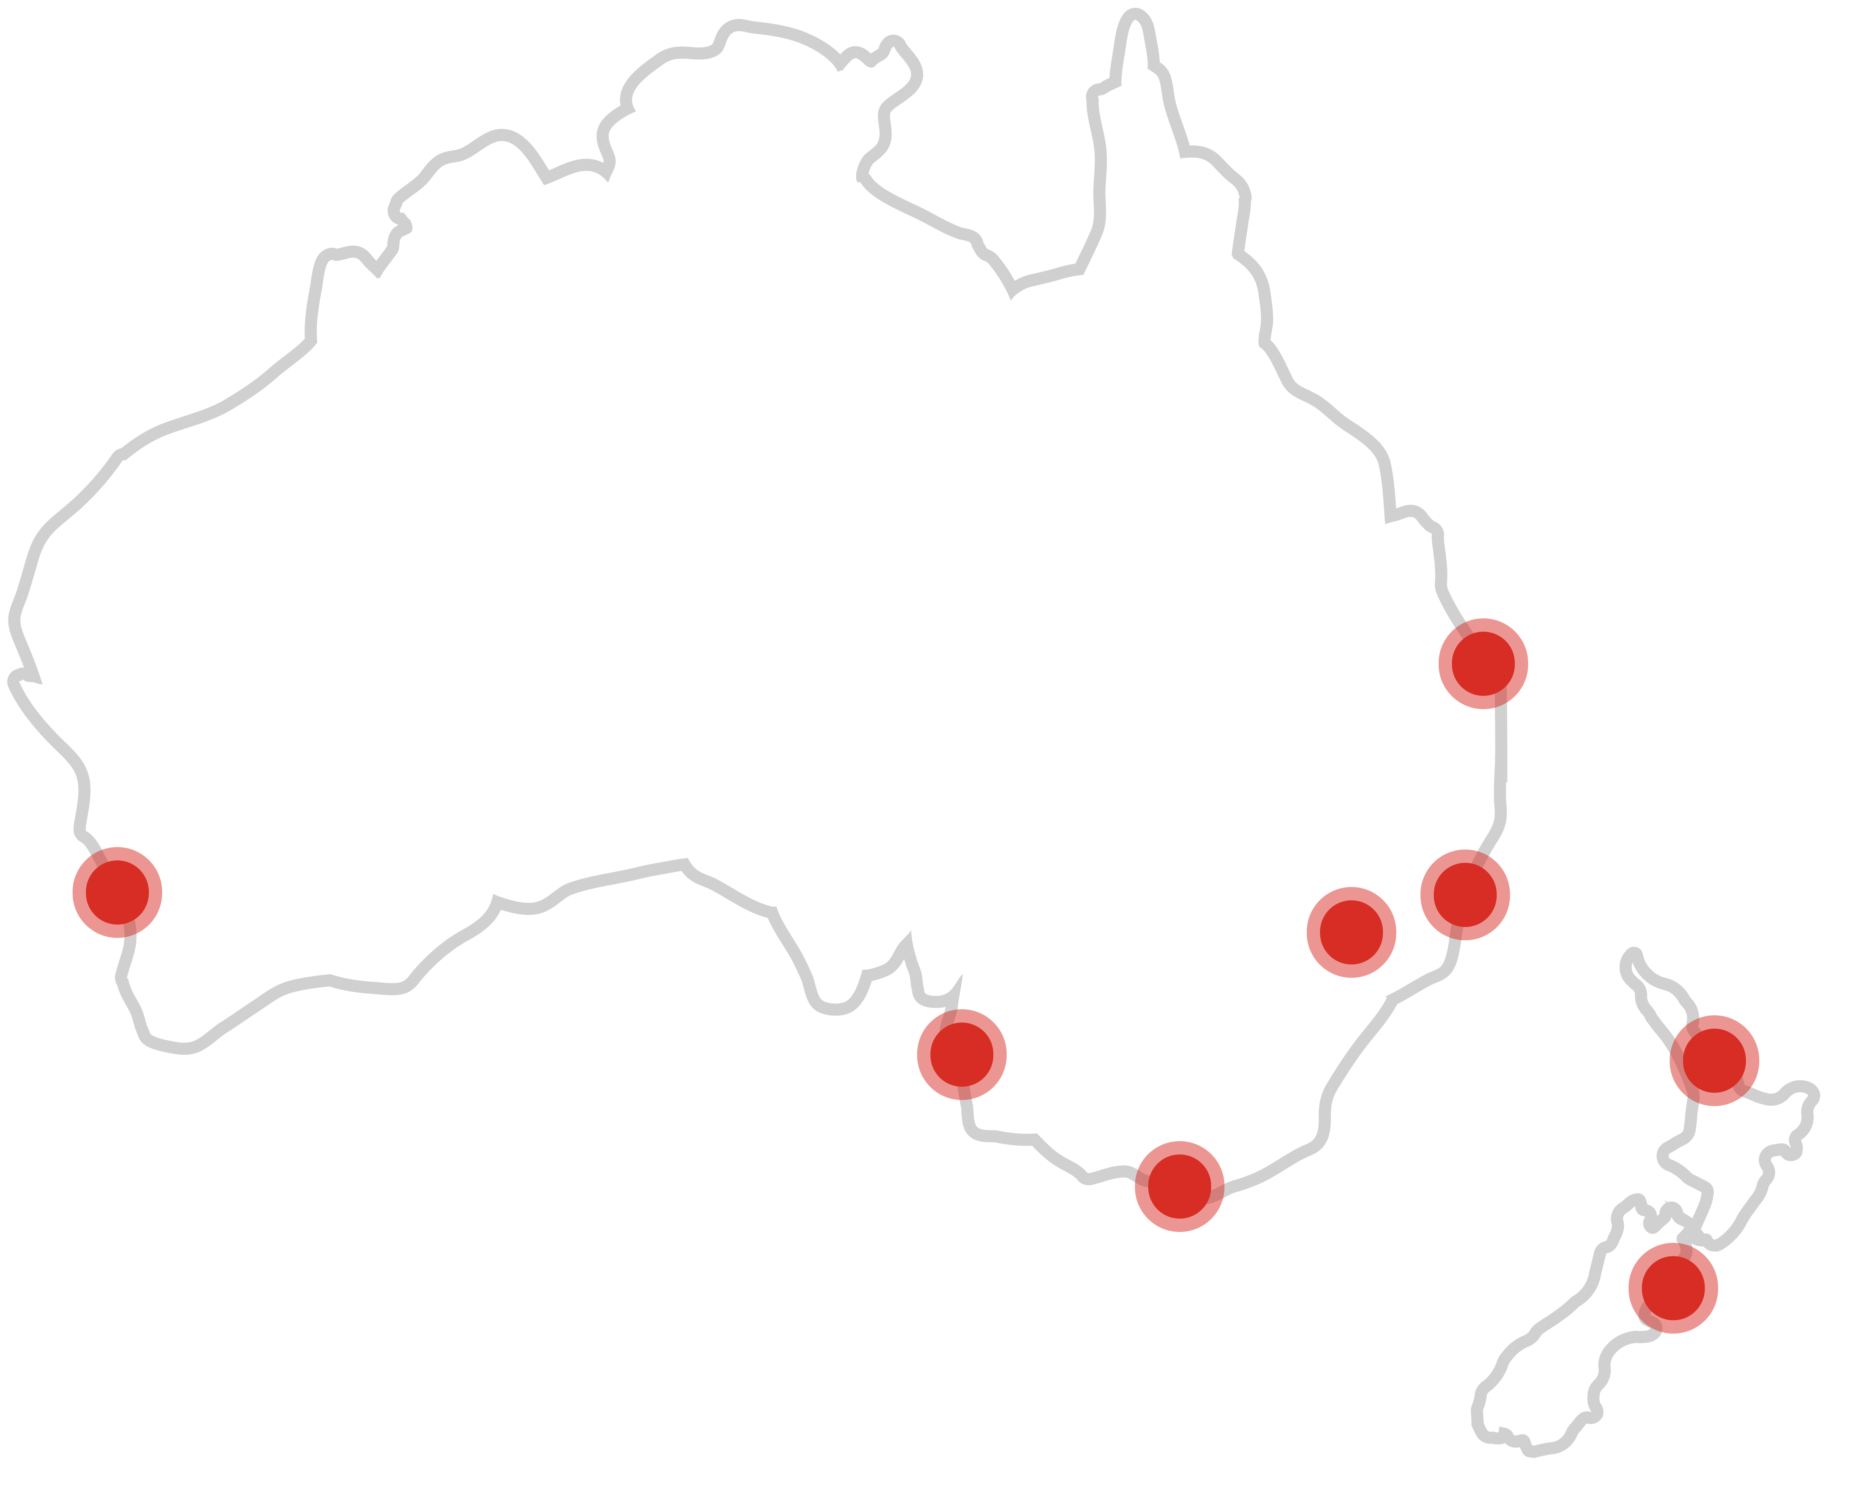 outlined graphic of a map of australia with red dots around main cities